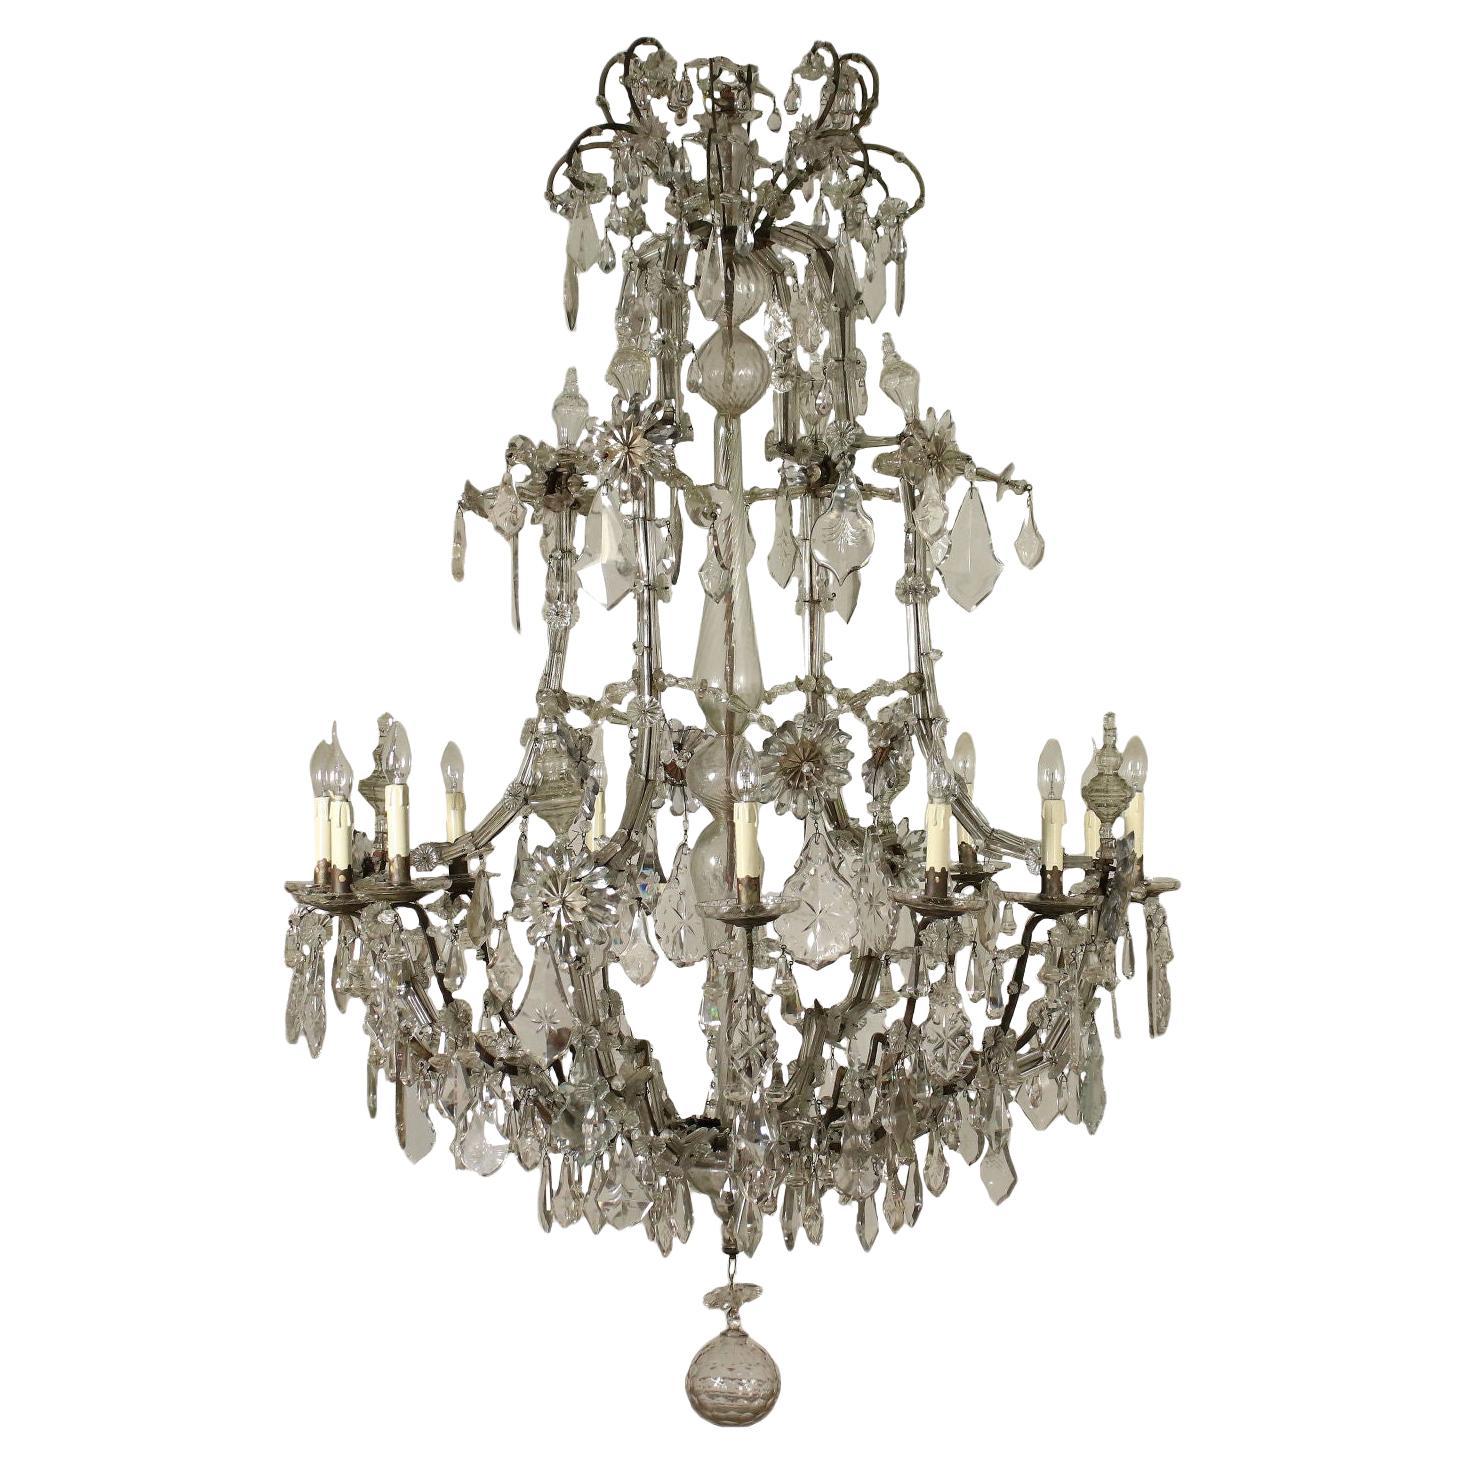 Chandelier Maria Theresa Iron Bronze Glass, Italy, Late 18th Century